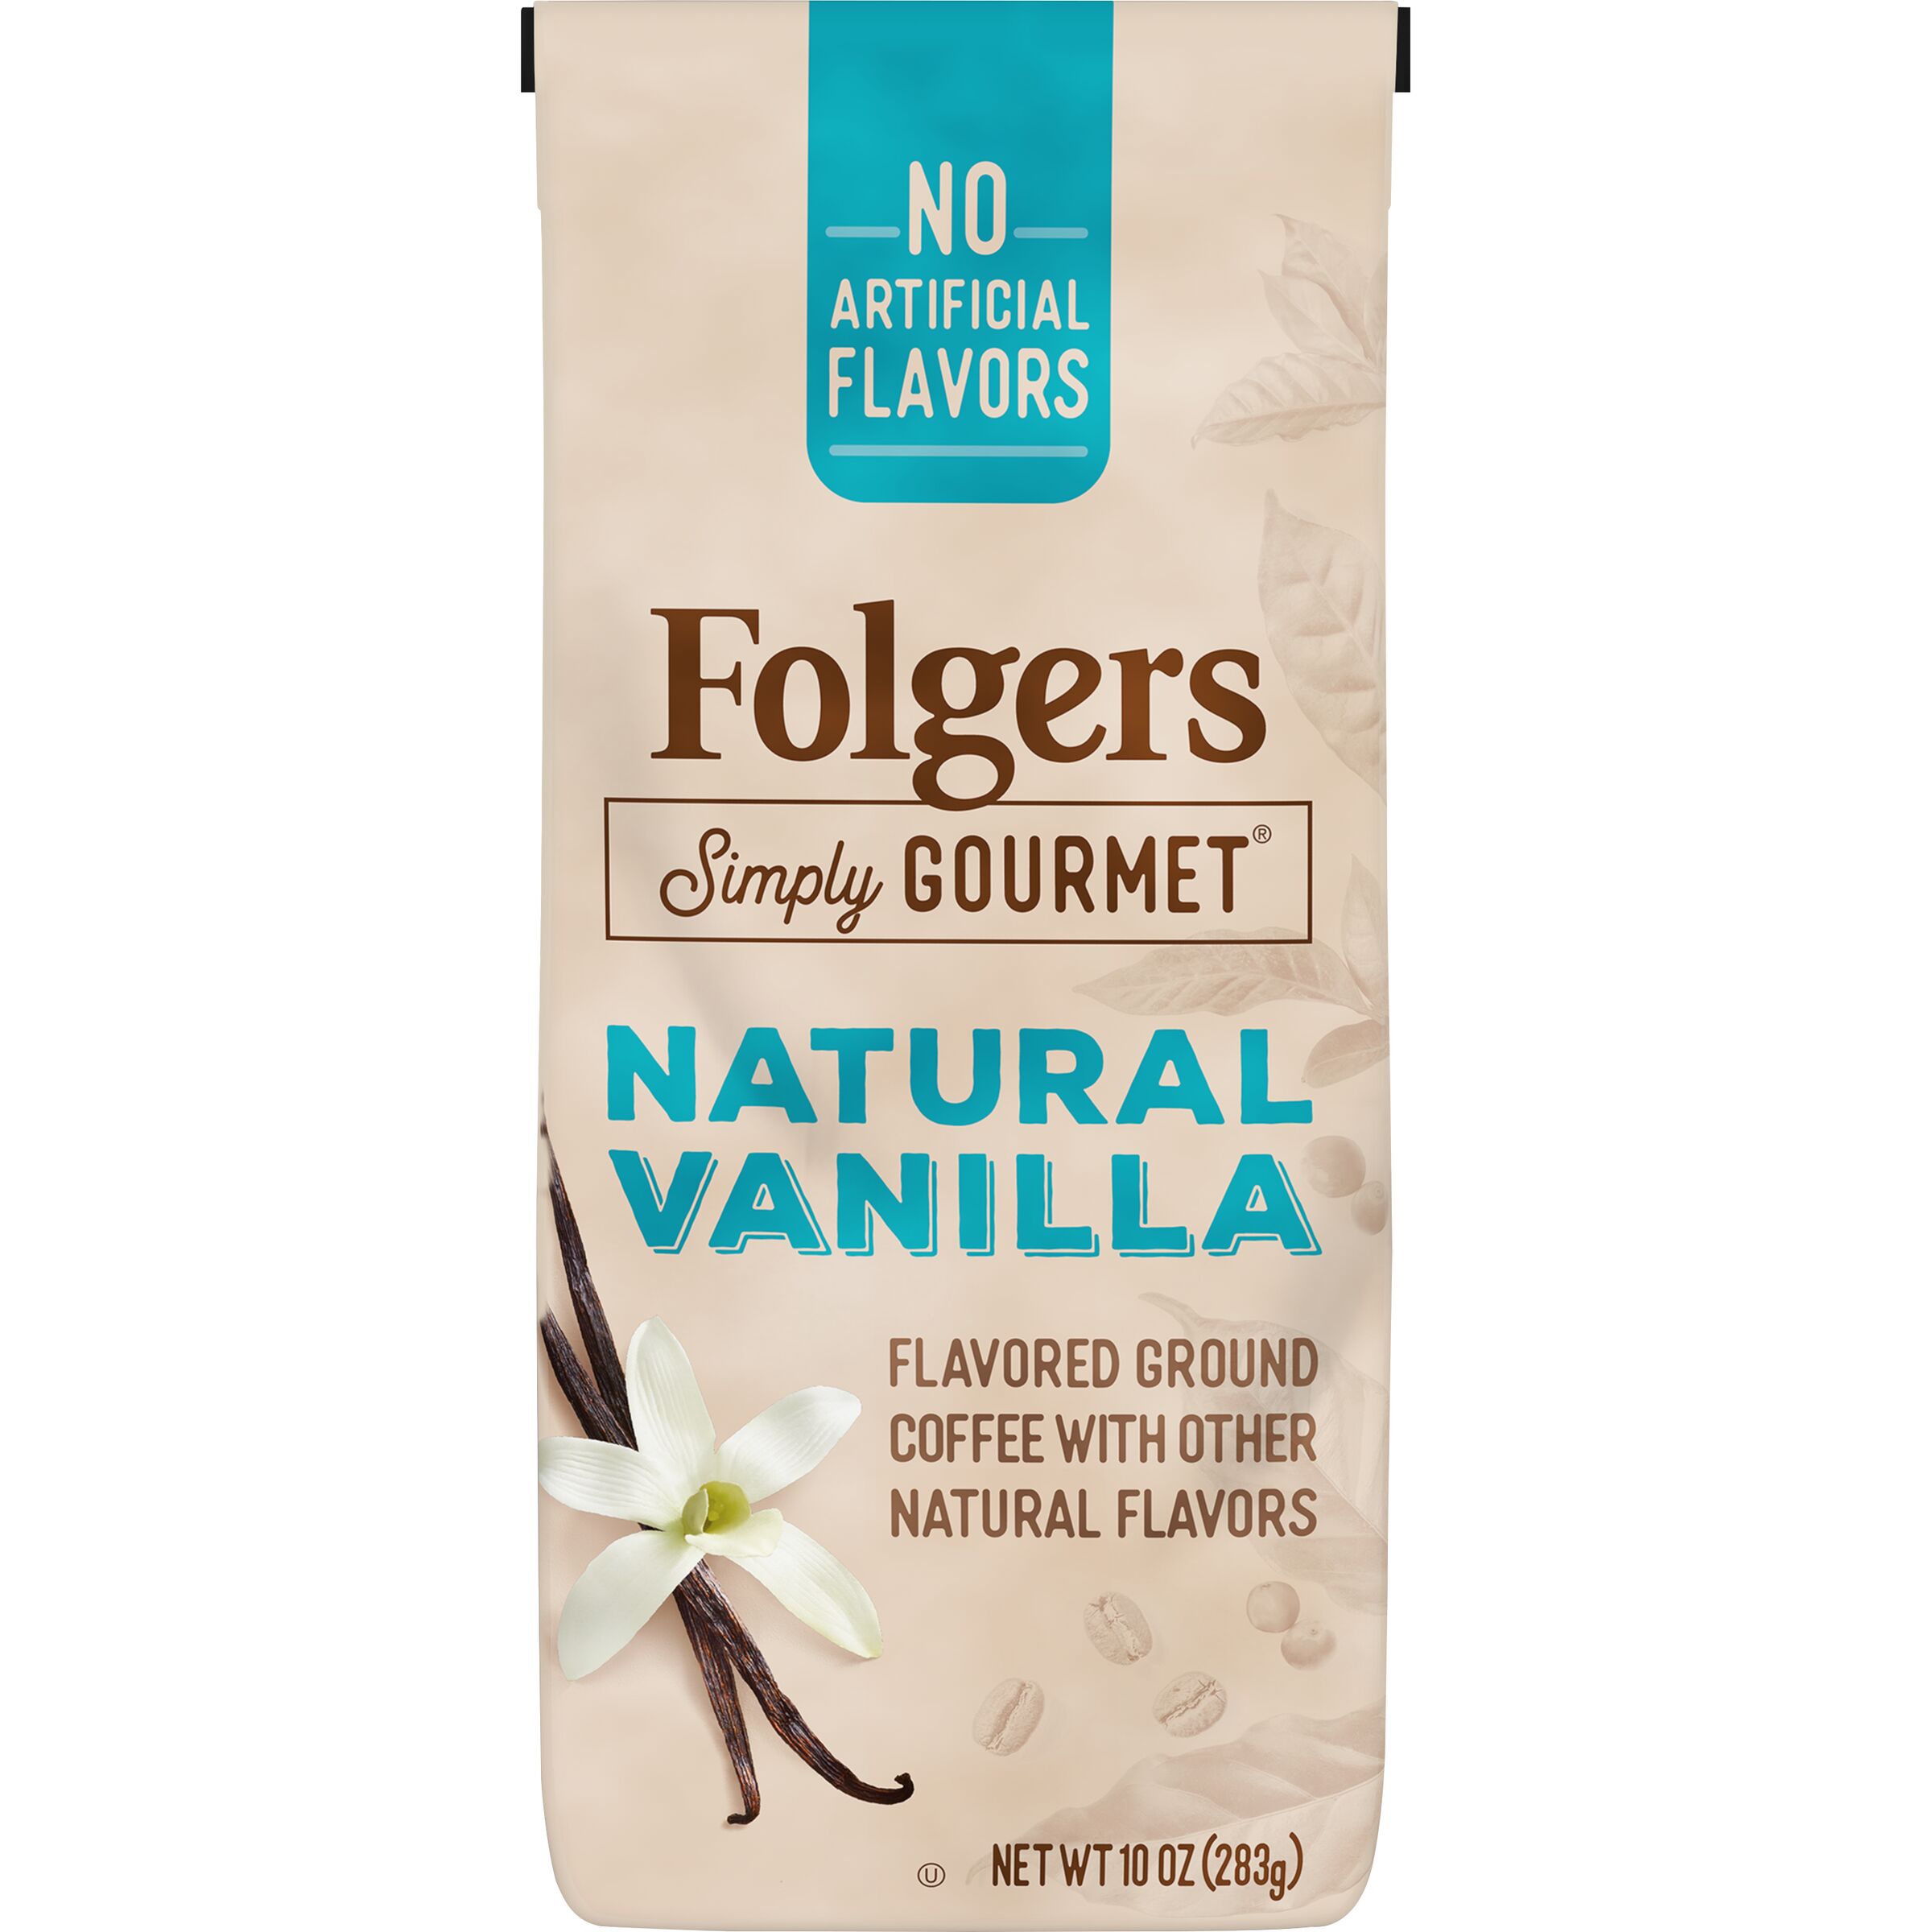 Folgers Simply Gourmet Natural Vanilla Flavored Ground Coffee, With Other Natural Flavors, 10-Ounce Bag - image 1 of 6